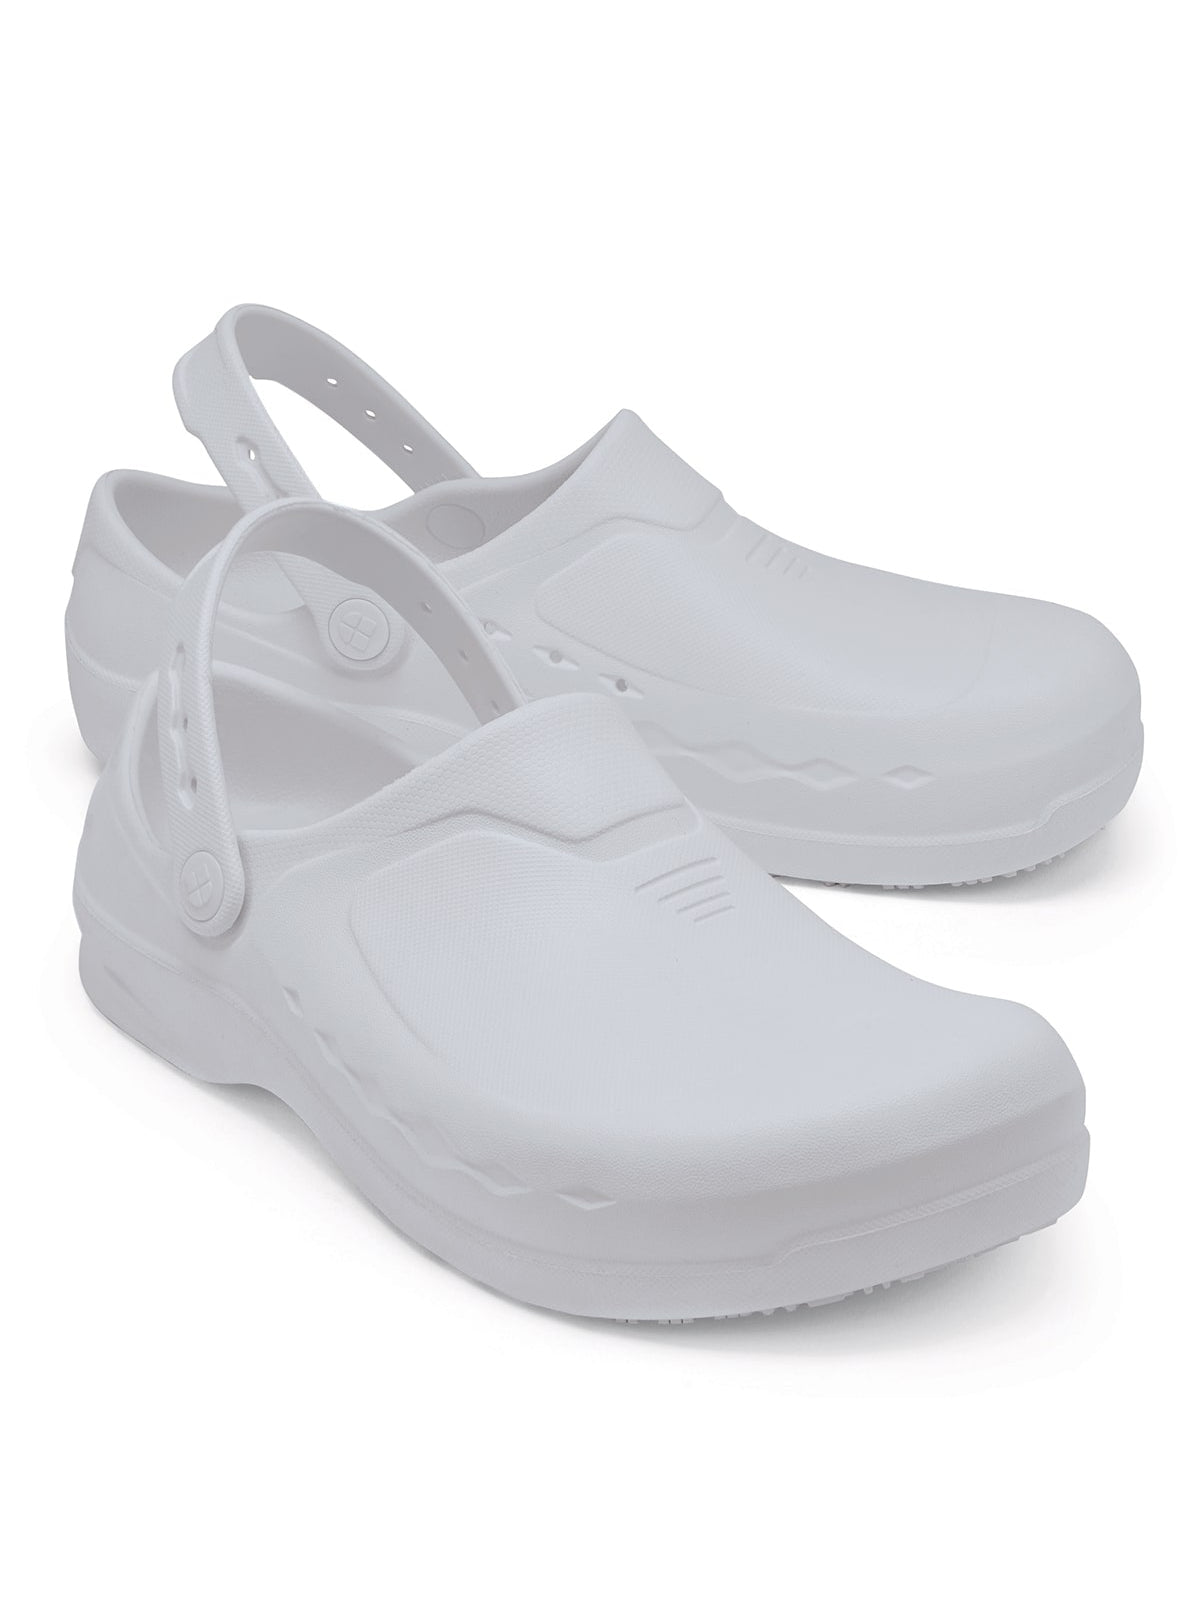 Unisex Work Shoe Zinc White by  Shoes For Crews.